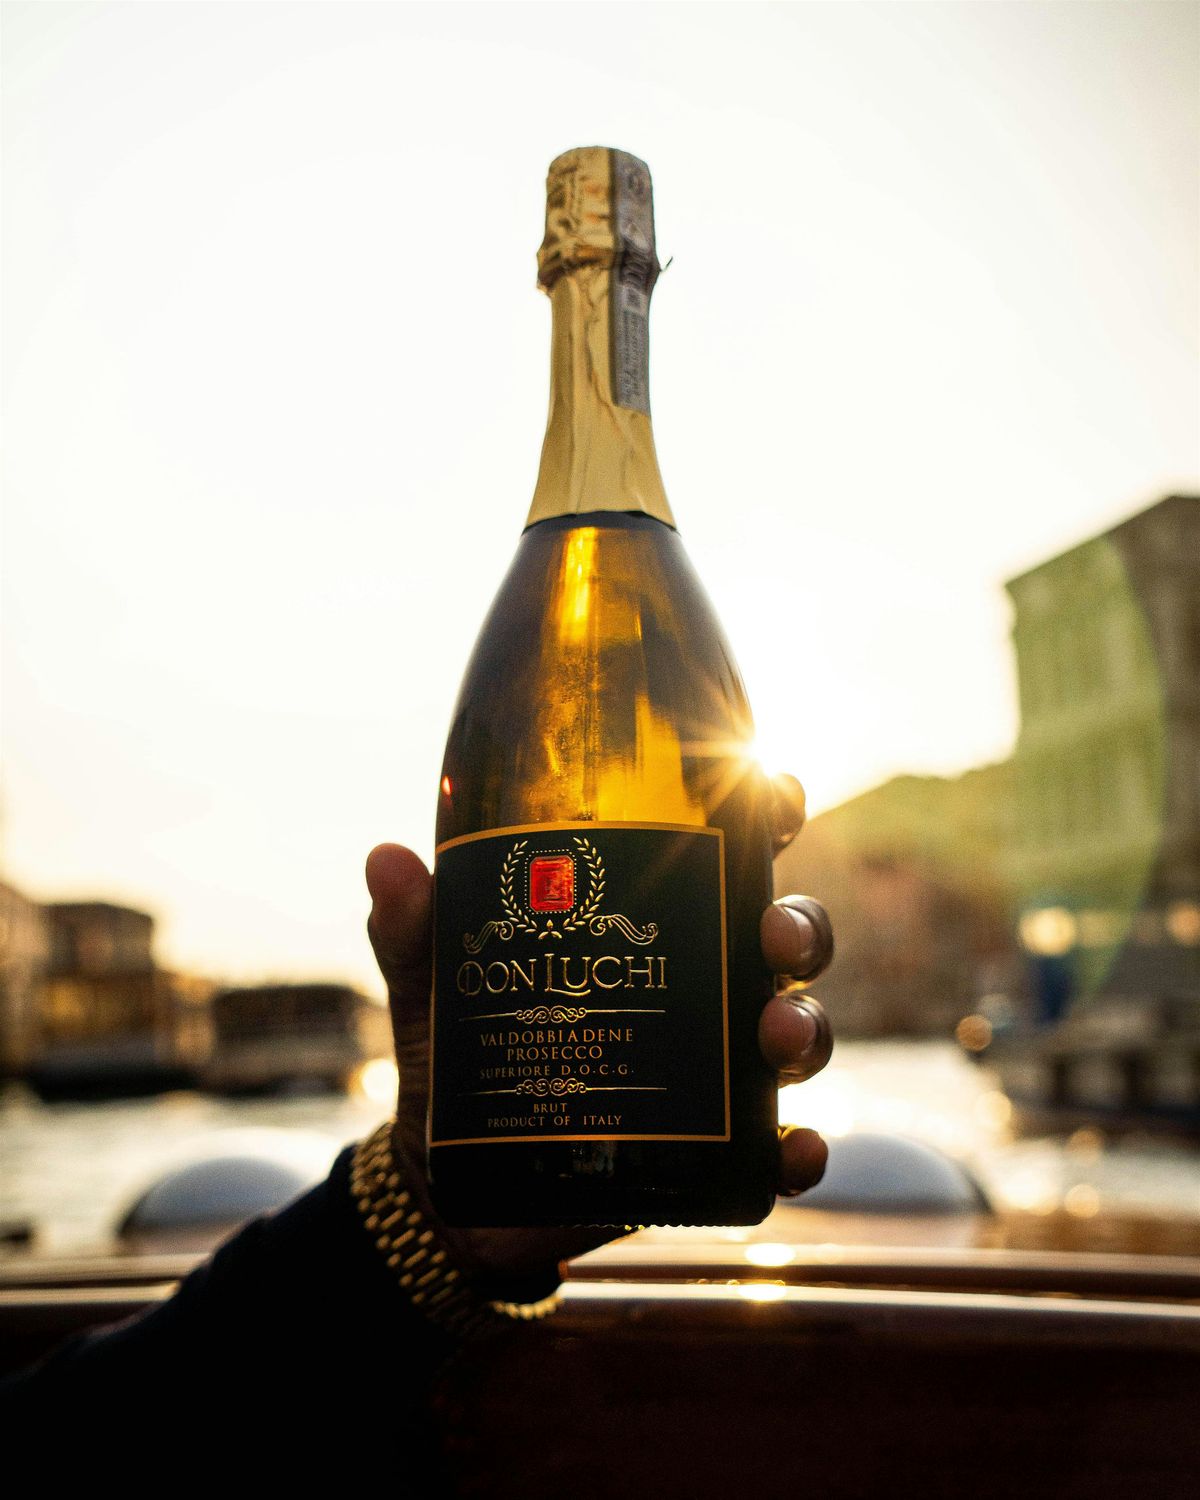 Toast to Excellence: Don Luchi Prosecco Launch Party & Tasting